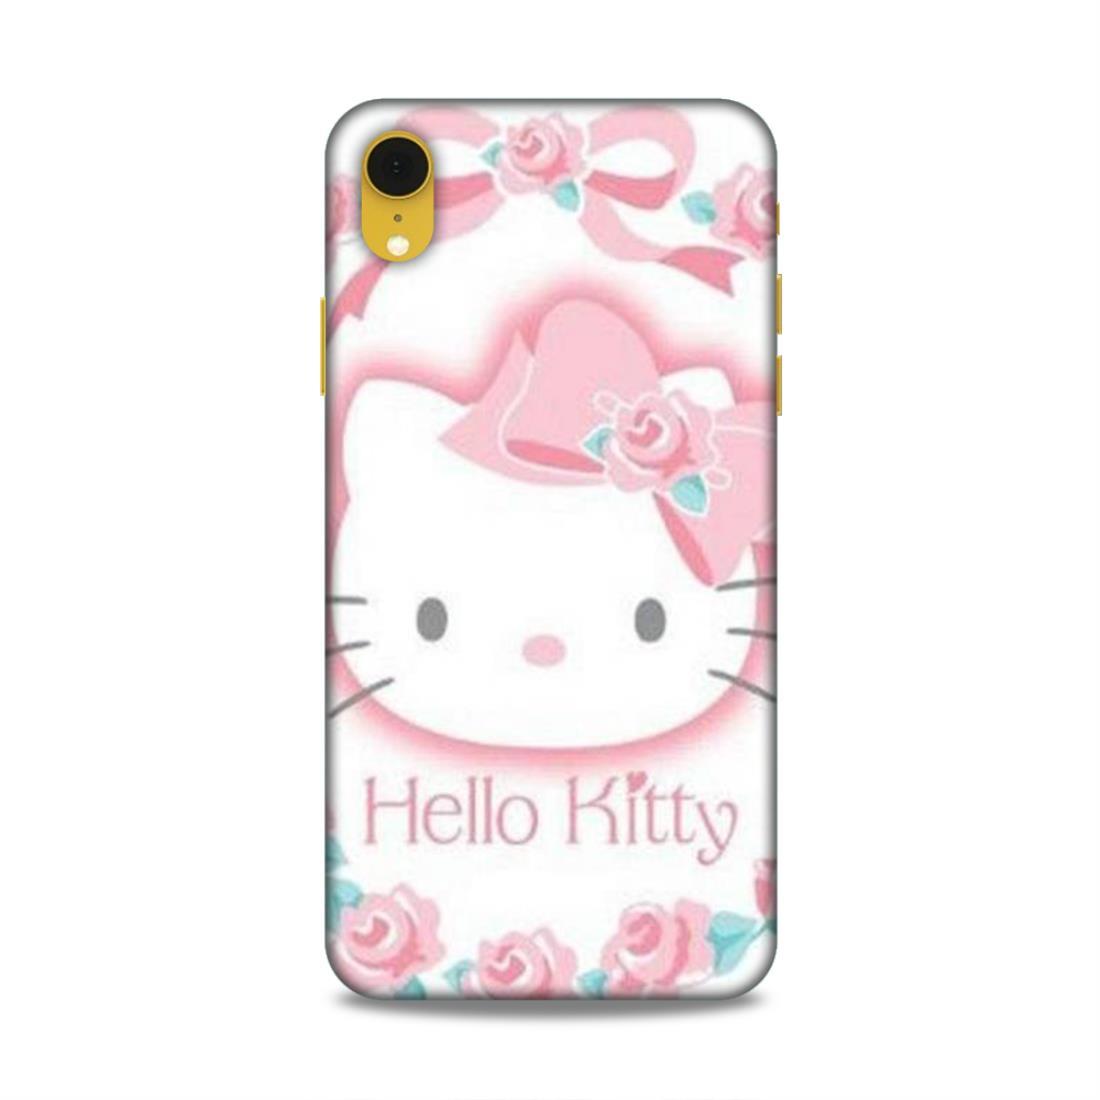 Hellow Kitty Pink iPhone XR Phone Cover Case